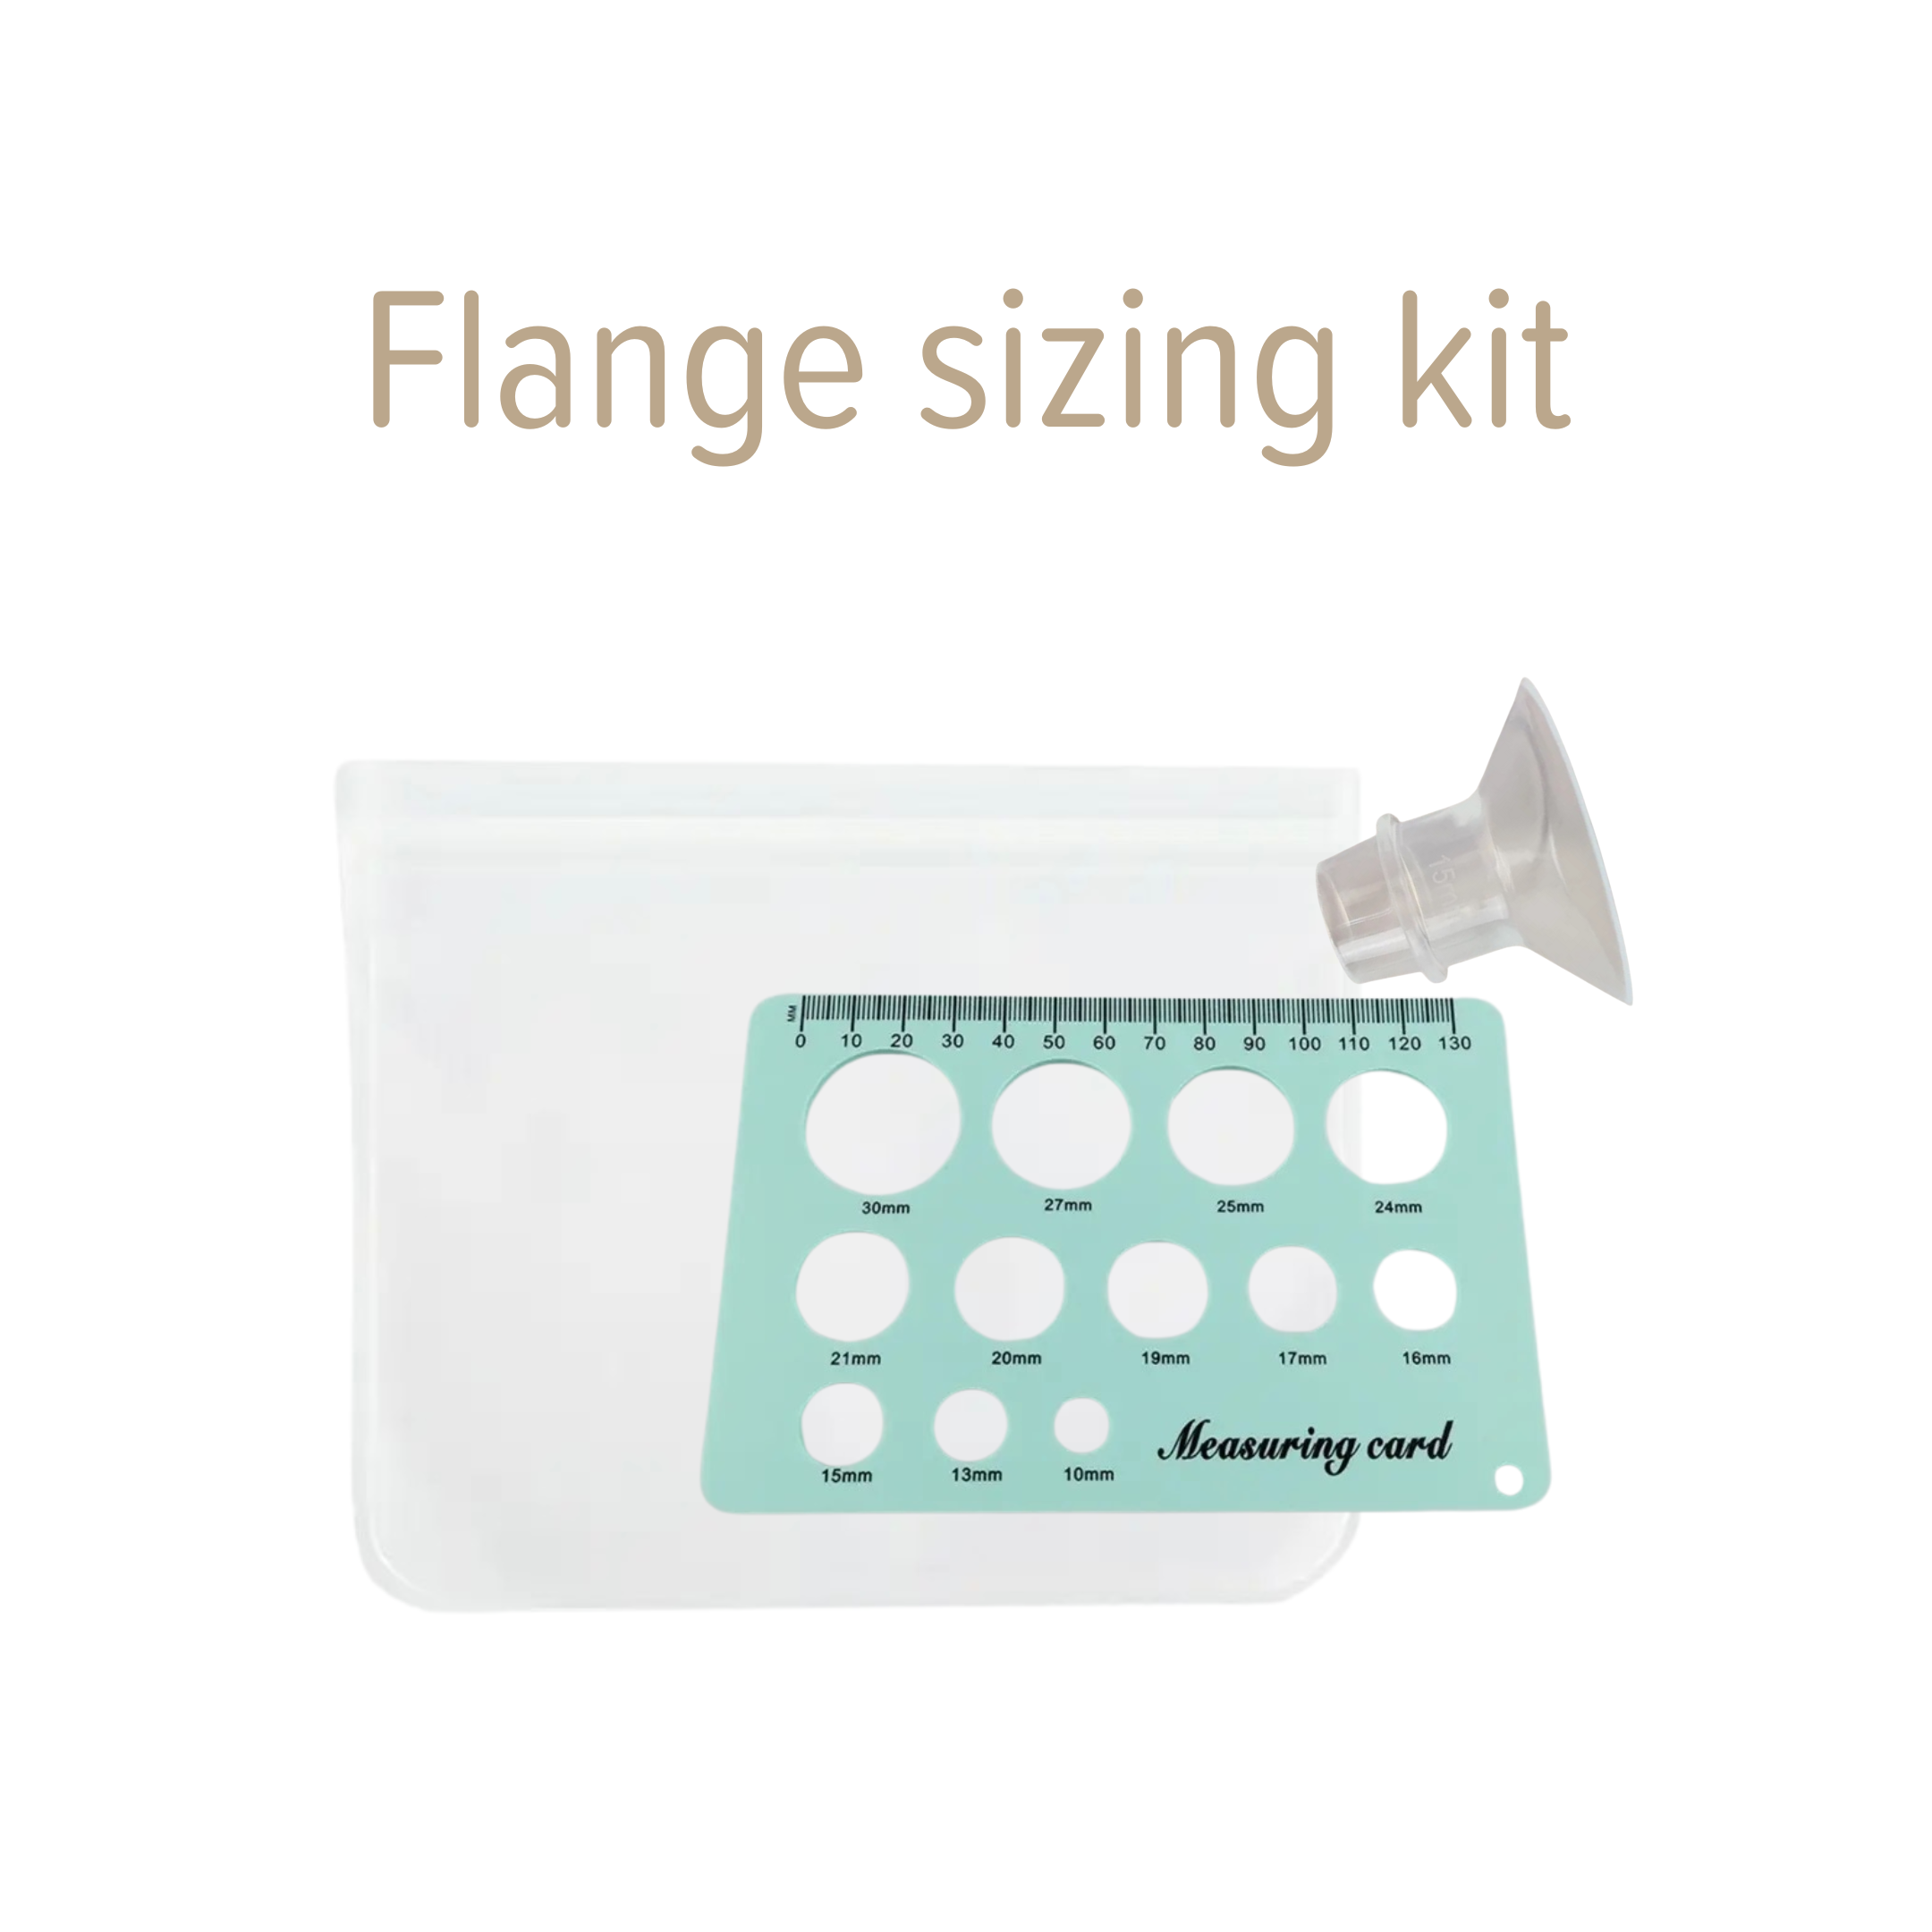 Flange sizing simplified — Every Drop Lactation Services